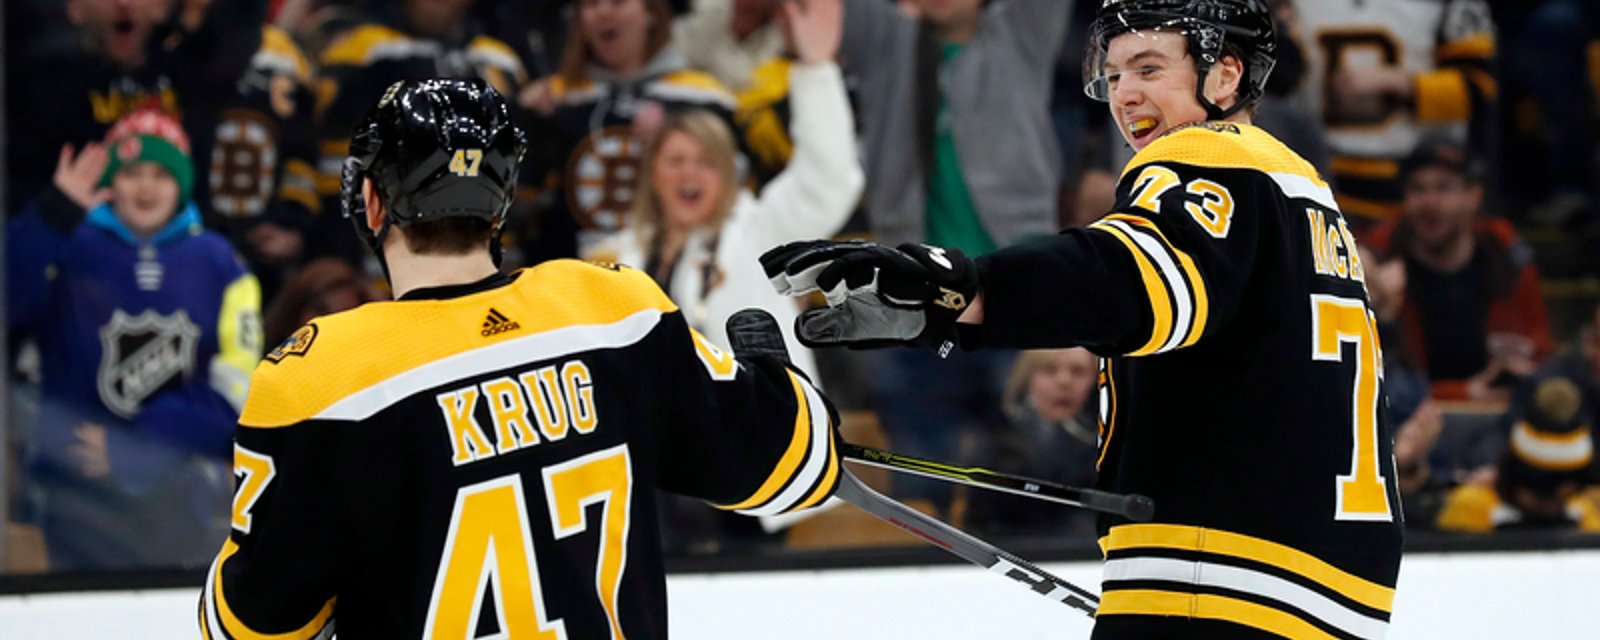 Bruins’ McAvoy is extremely upset about losing Krug 